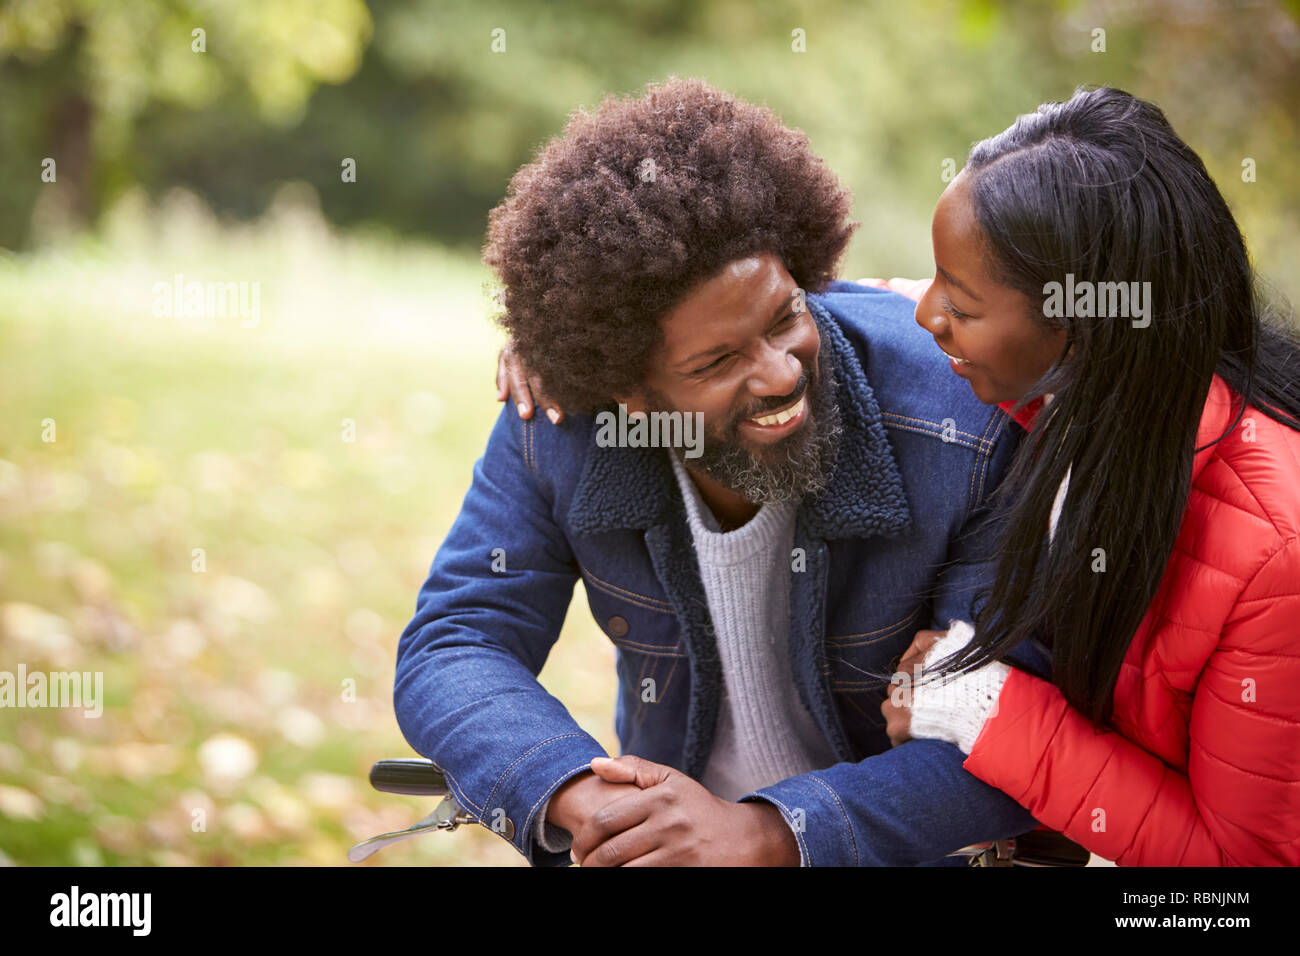 Black couple embracing and smiling in a park, Close up Banque D'Images